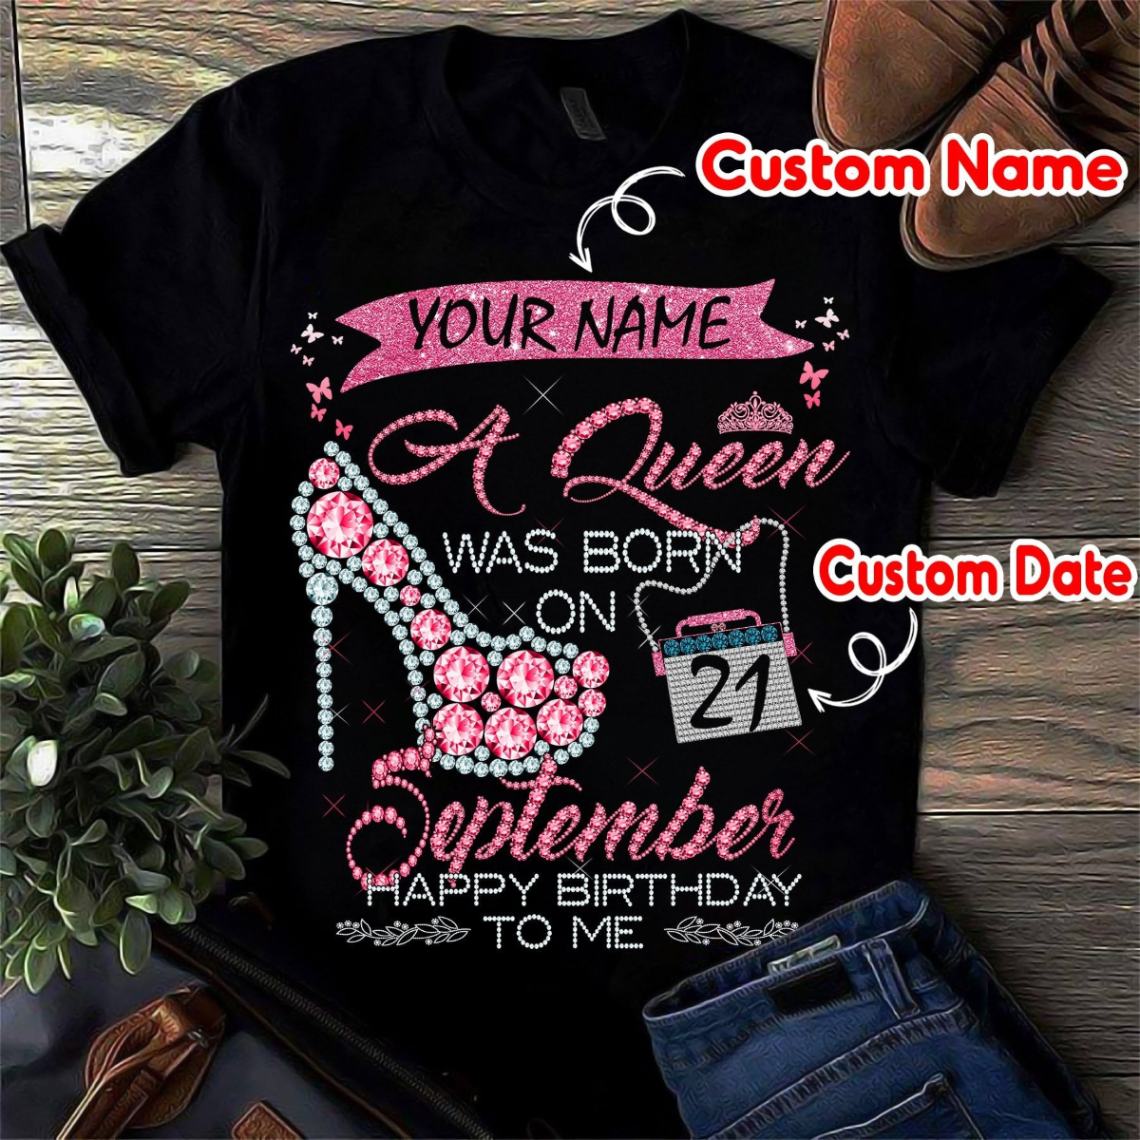 Custom Your Name A Queen Was Born On Custom Date September Happy Birthday To Me Womens T-shirt Hoodie Sweatshirt Plus Size S-5xl